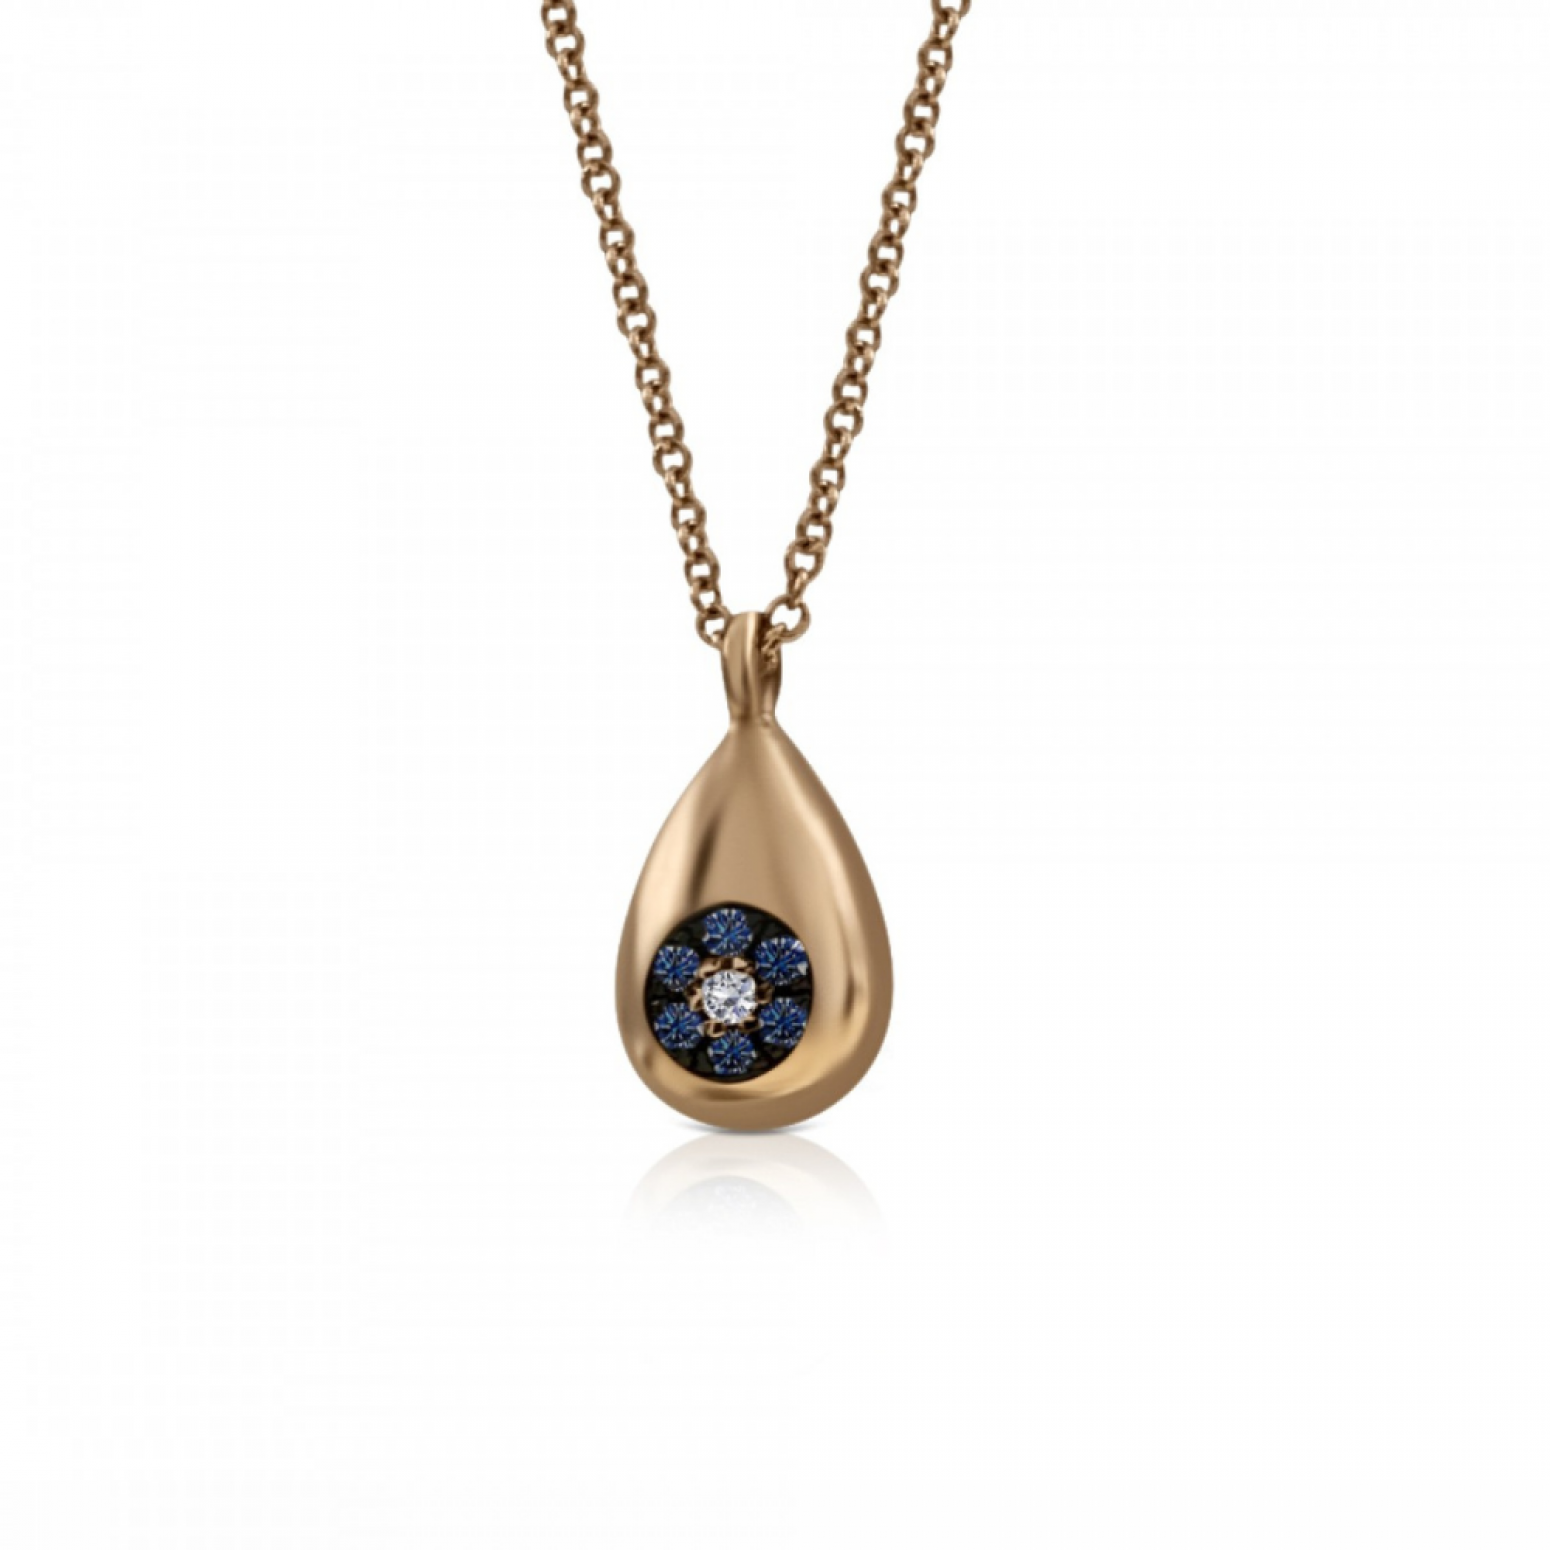 Eye necklace, Κ18 pink gold with white and blue diamonds 0.07ct, VS2, H ko4784 NECKLACES Κοσμηματα - chrilia.gr